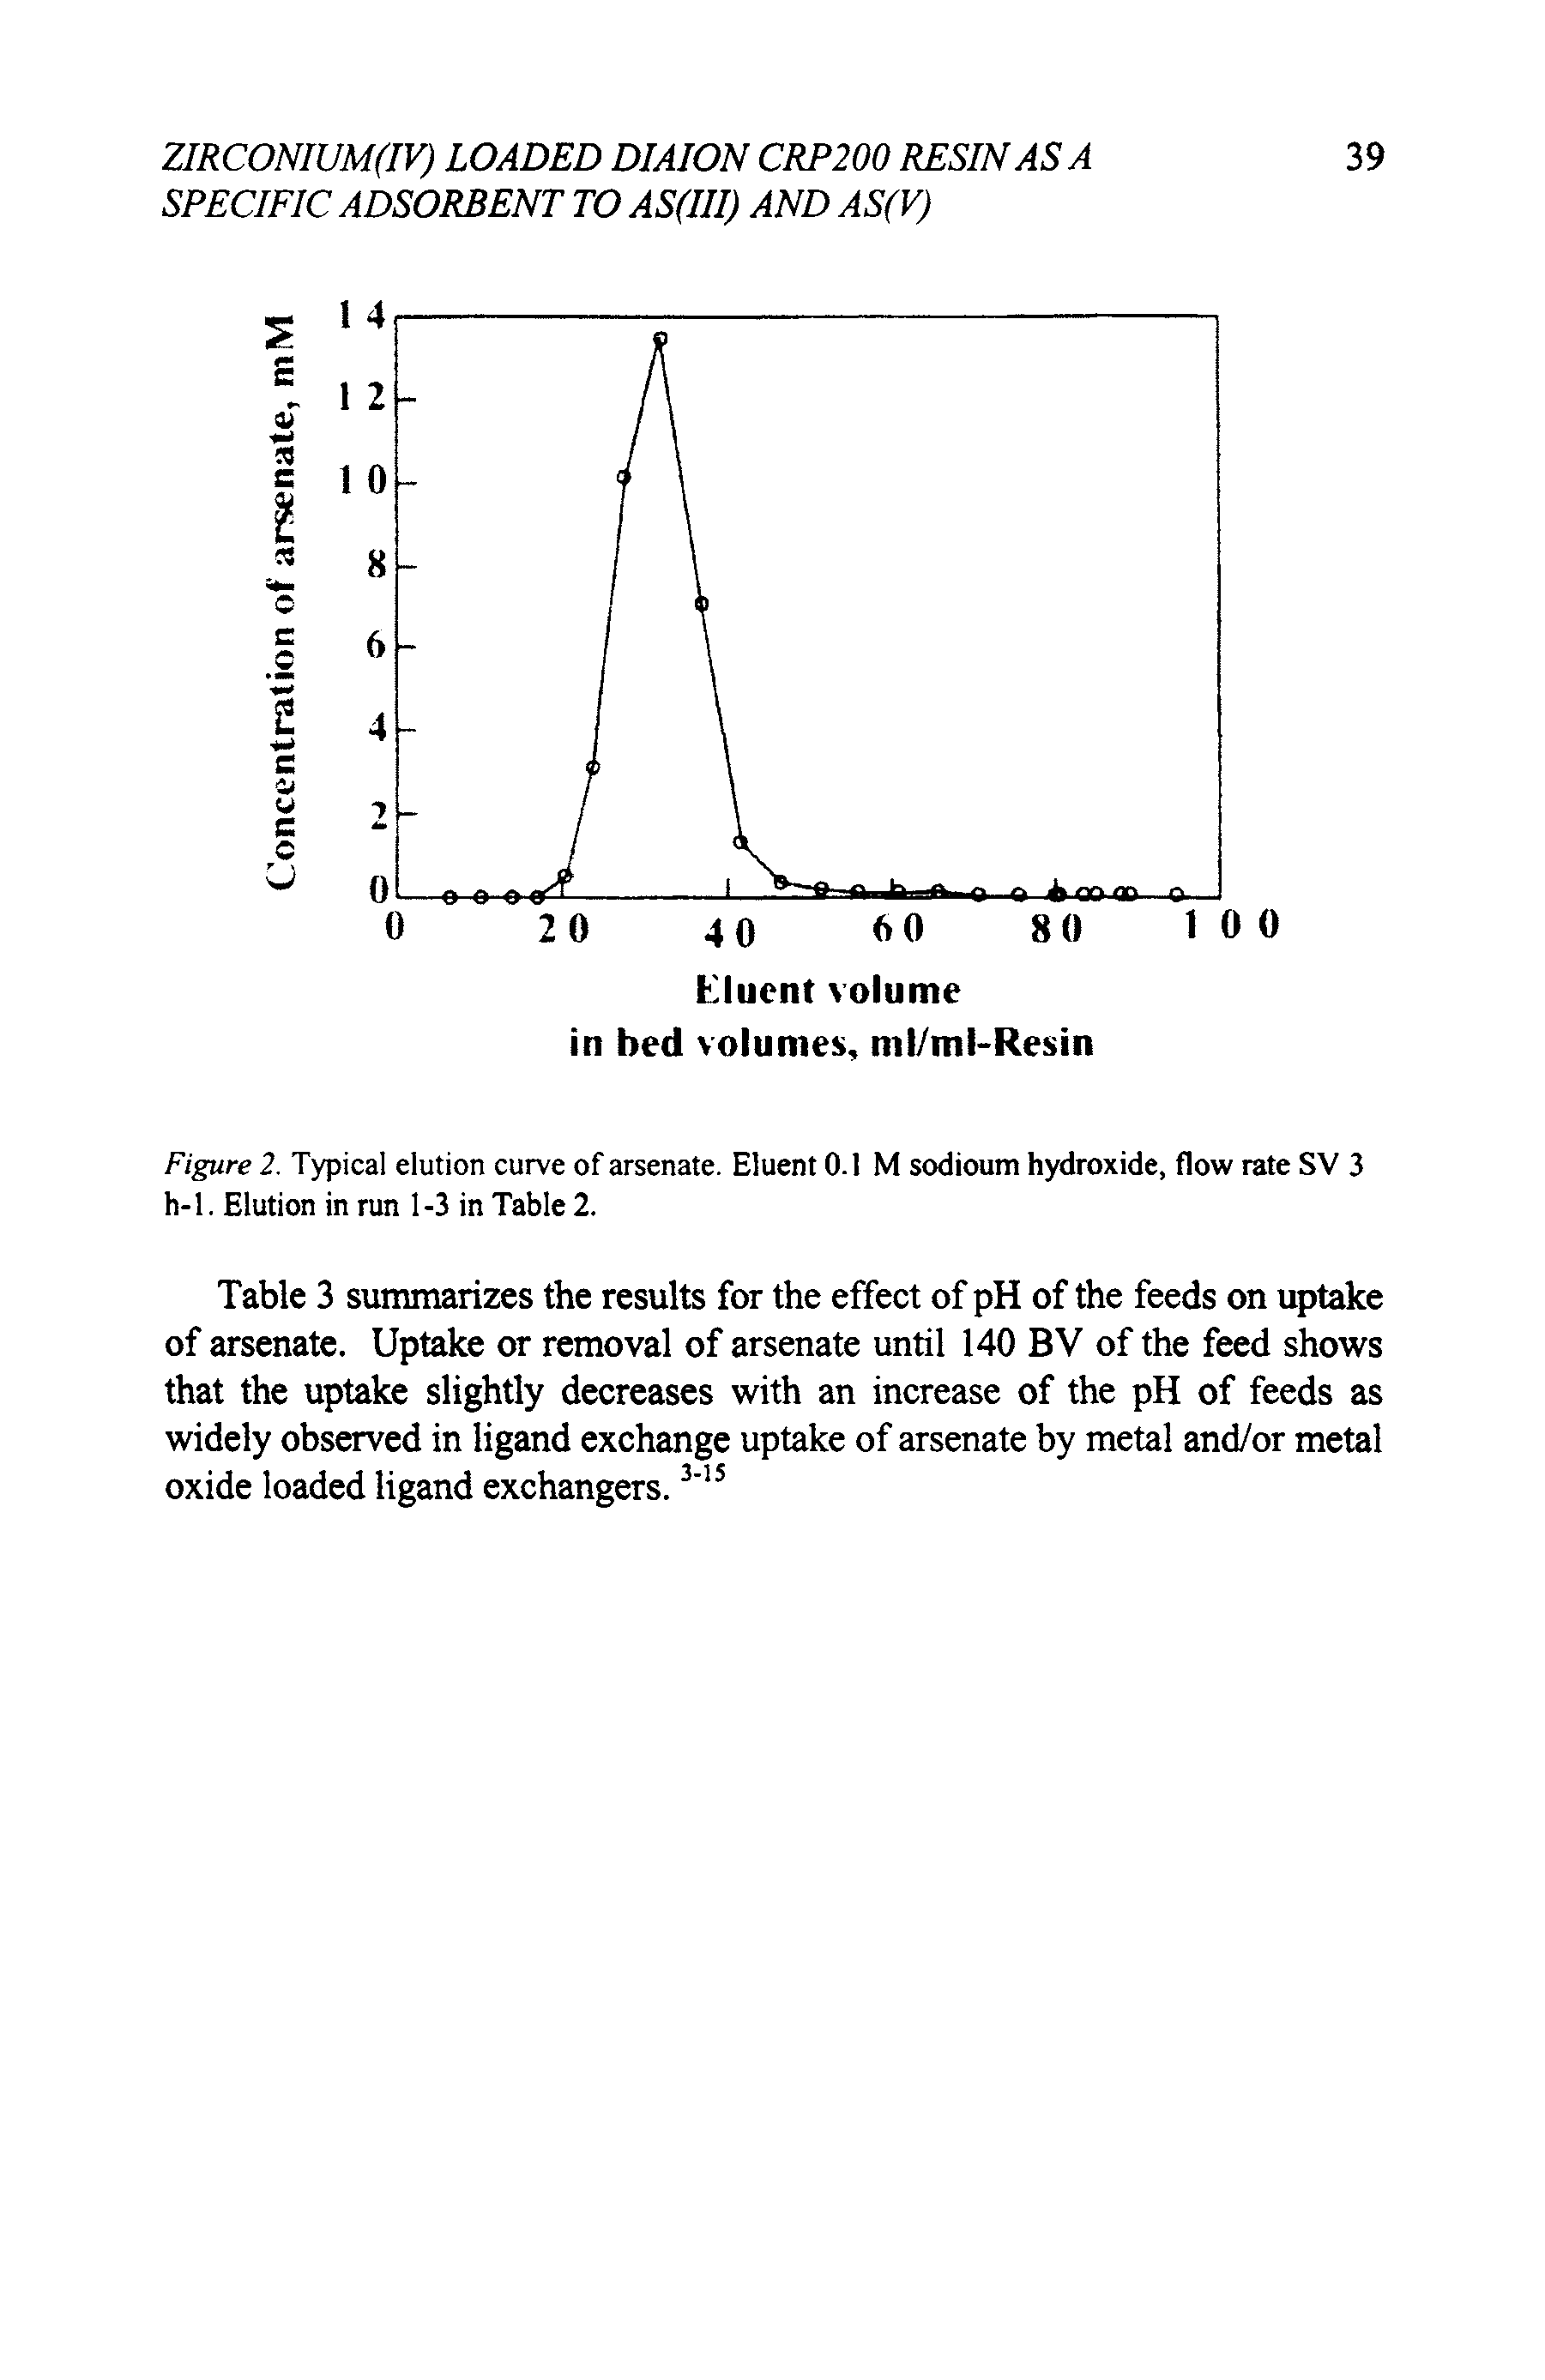 Figure 2. Typical elution curve of arsenate. Eluent 0.1 M sodioum hydroxide, flow rate SV 3 h-1. Elution in run 1-3 in Table 2.